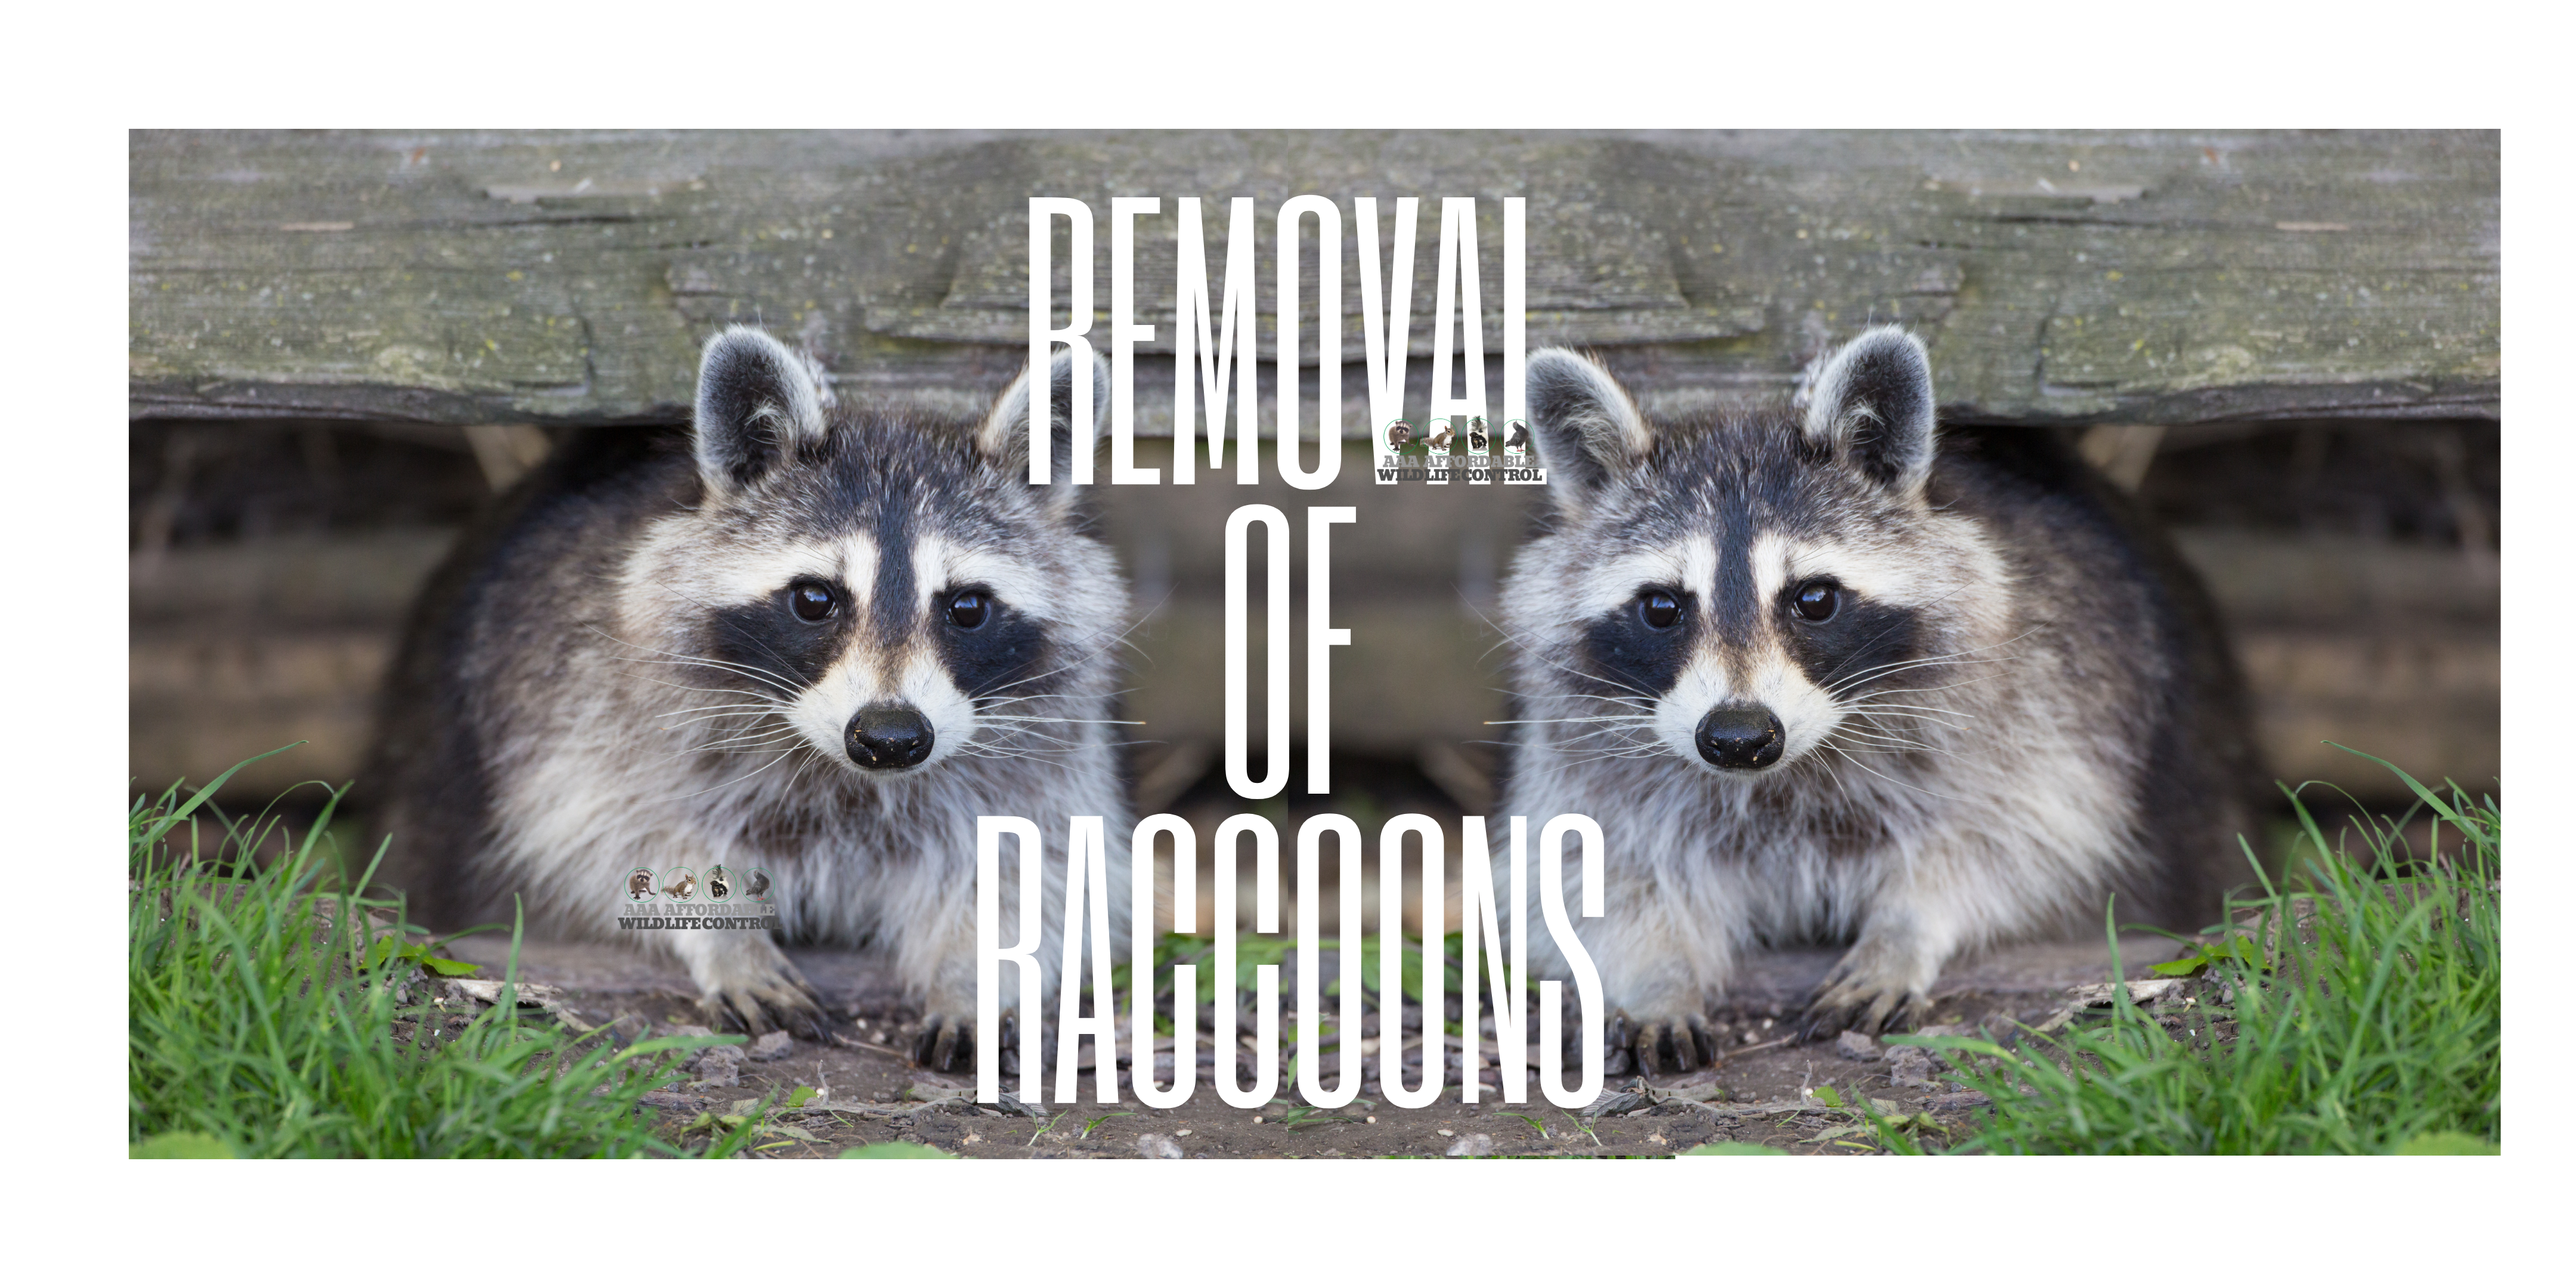 AFFORDABLE REMOVAL OF RACCOONS